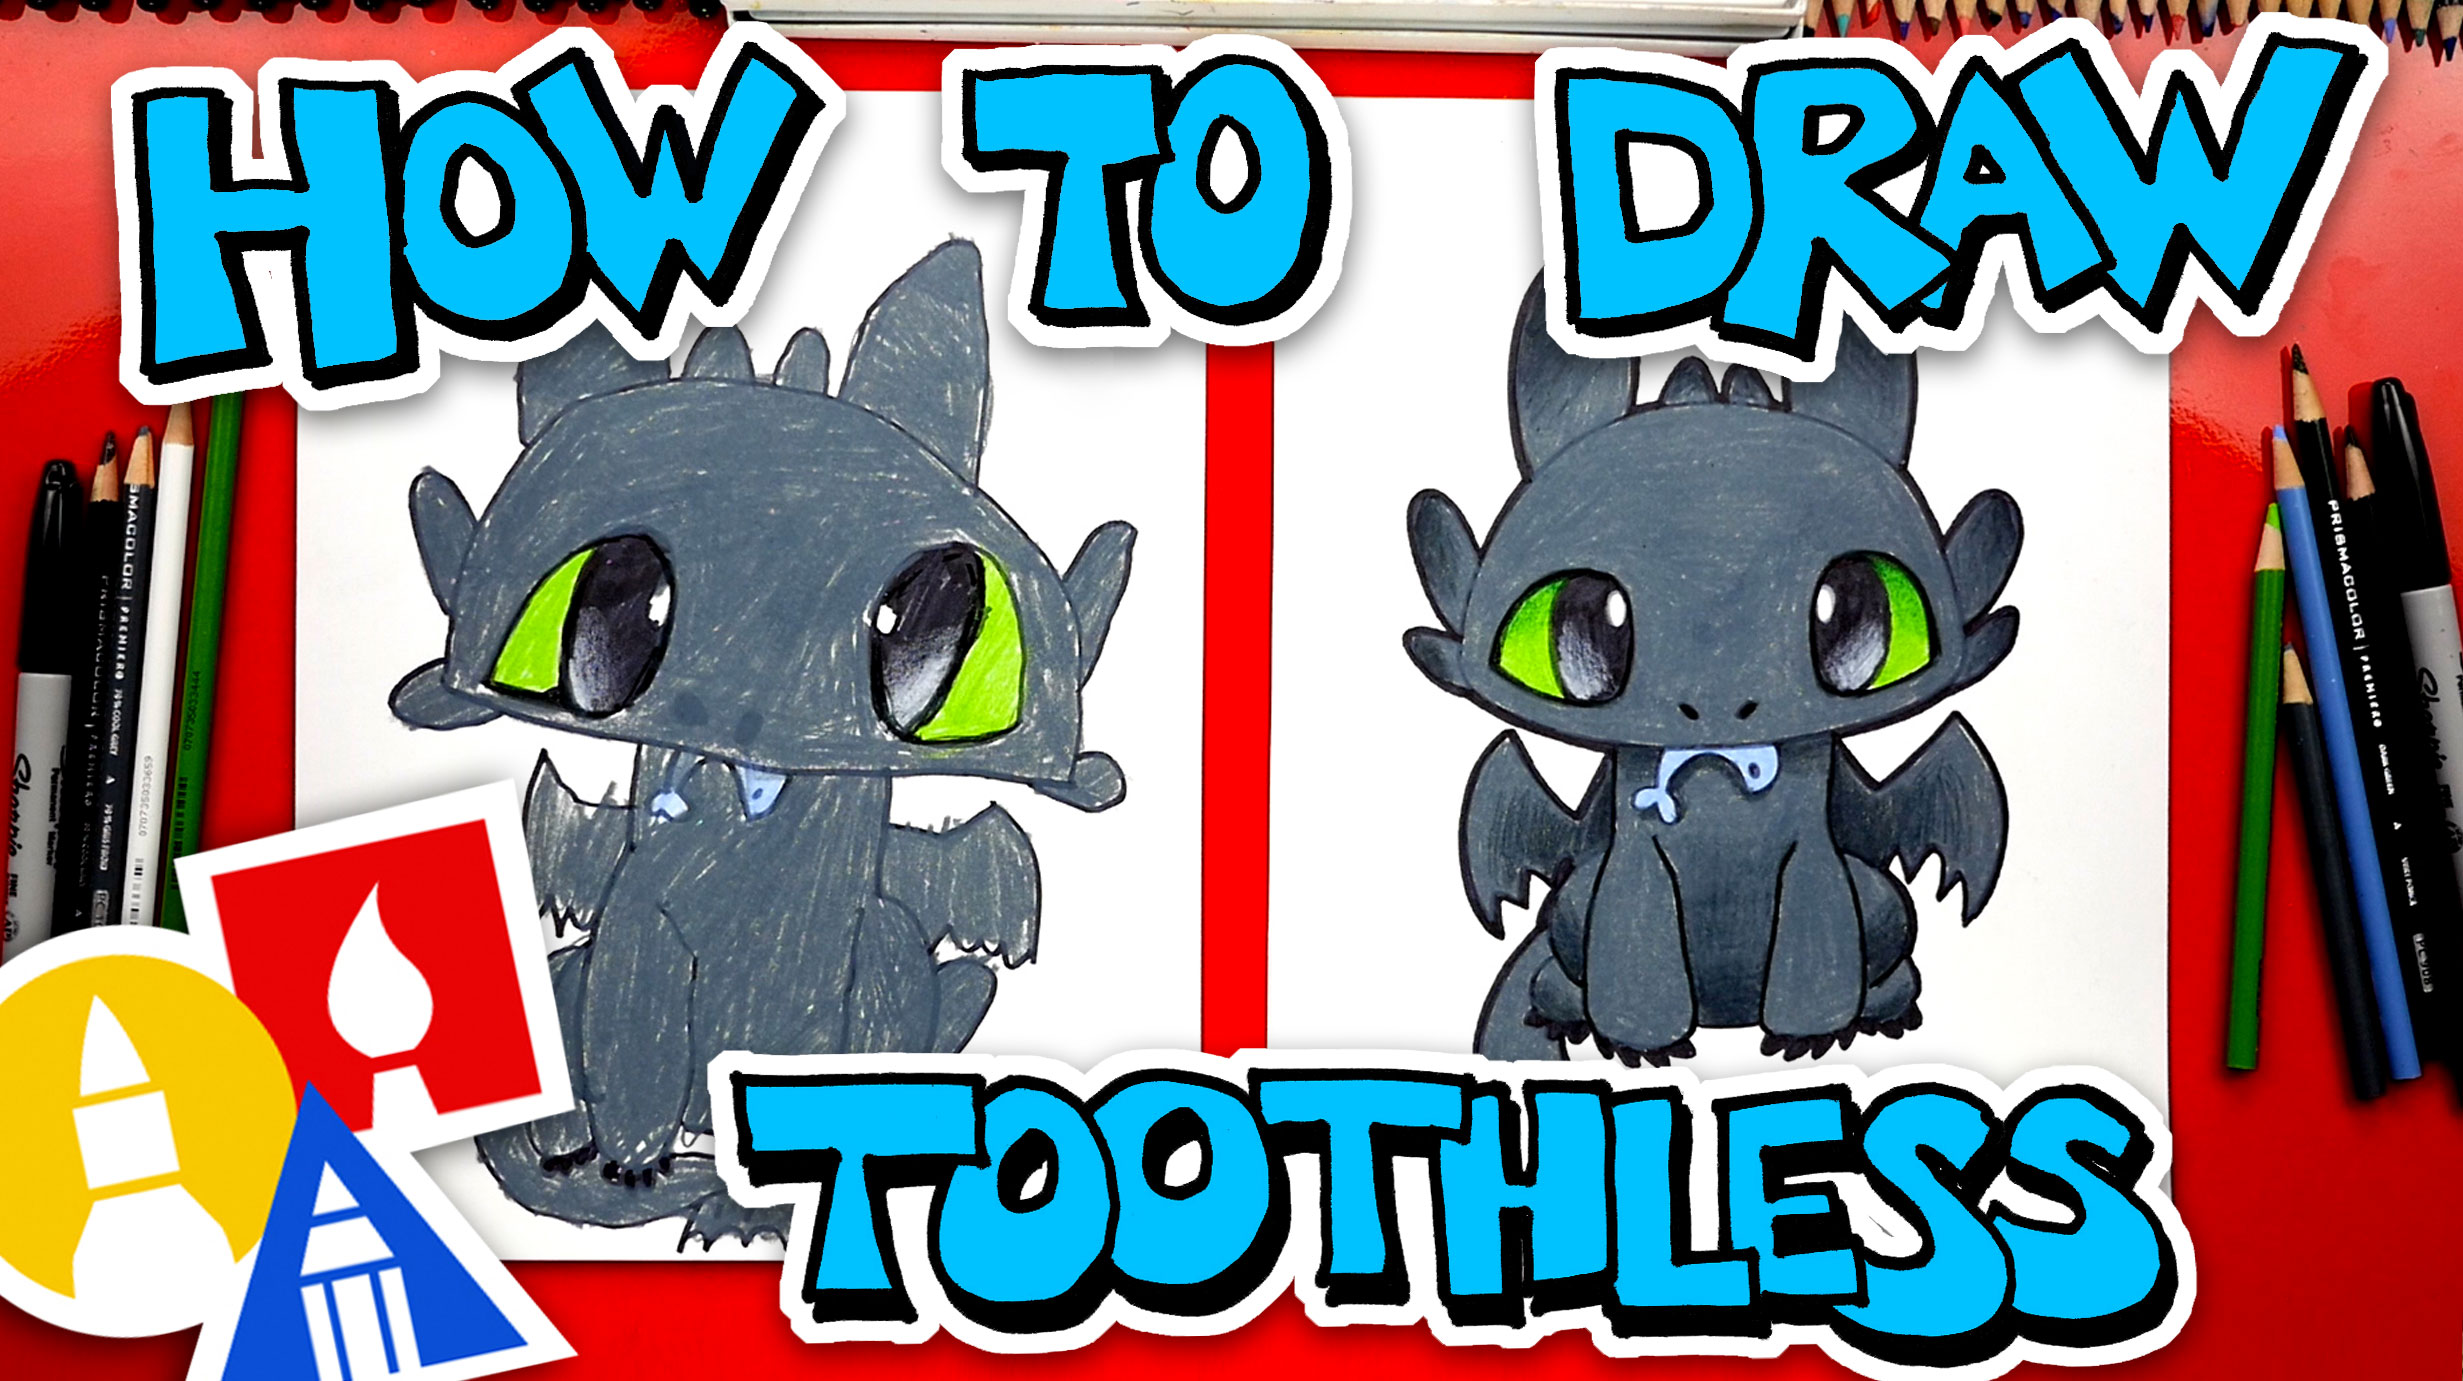 How To Draw Toothless From How To Train Your Dragon (Night Fury) - Art For Kids Hub